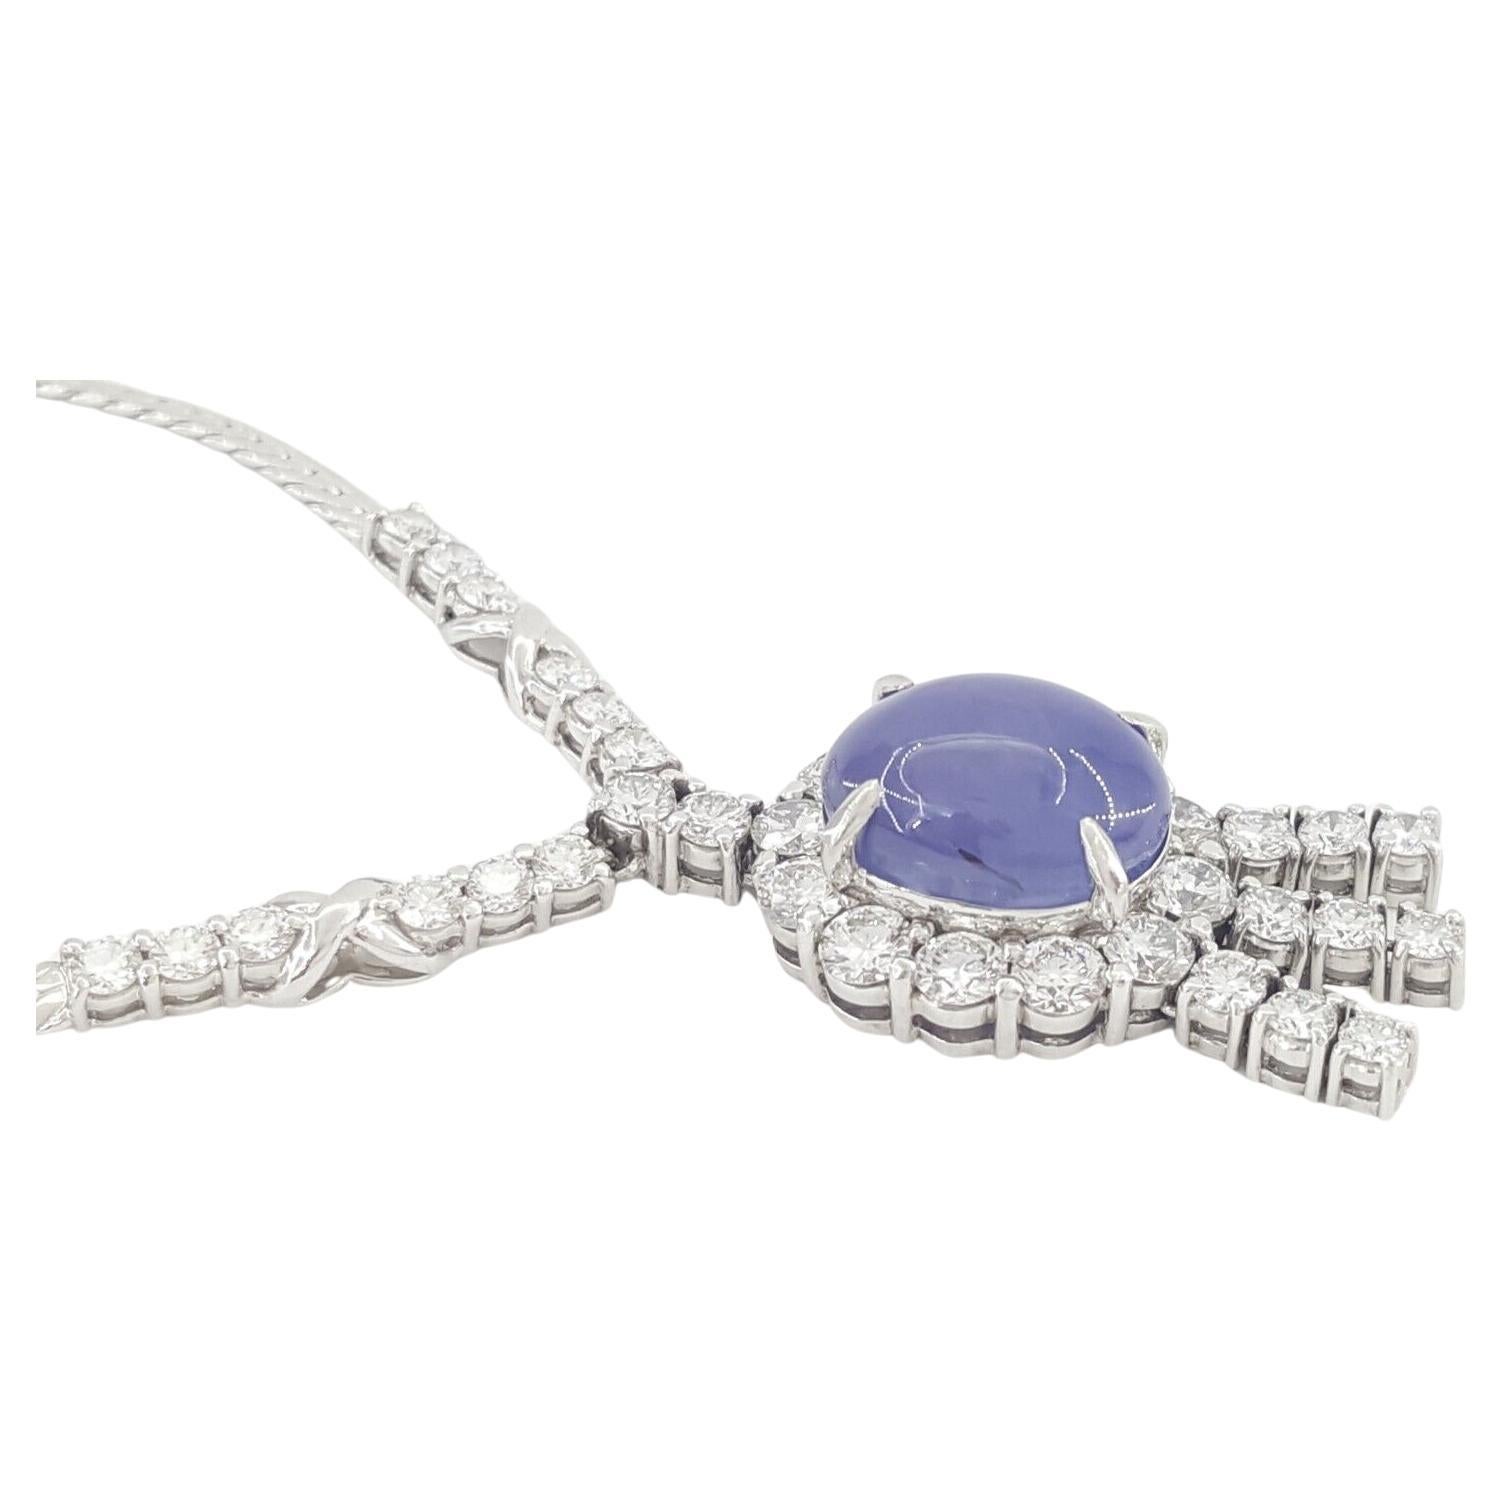 This is a beautiful  9.14 ct Cabochons Cut Blue Oval Star Sapphire & 2.23 ct Round Brilliant Cut Diamond & Halo Line Necklace 16.5